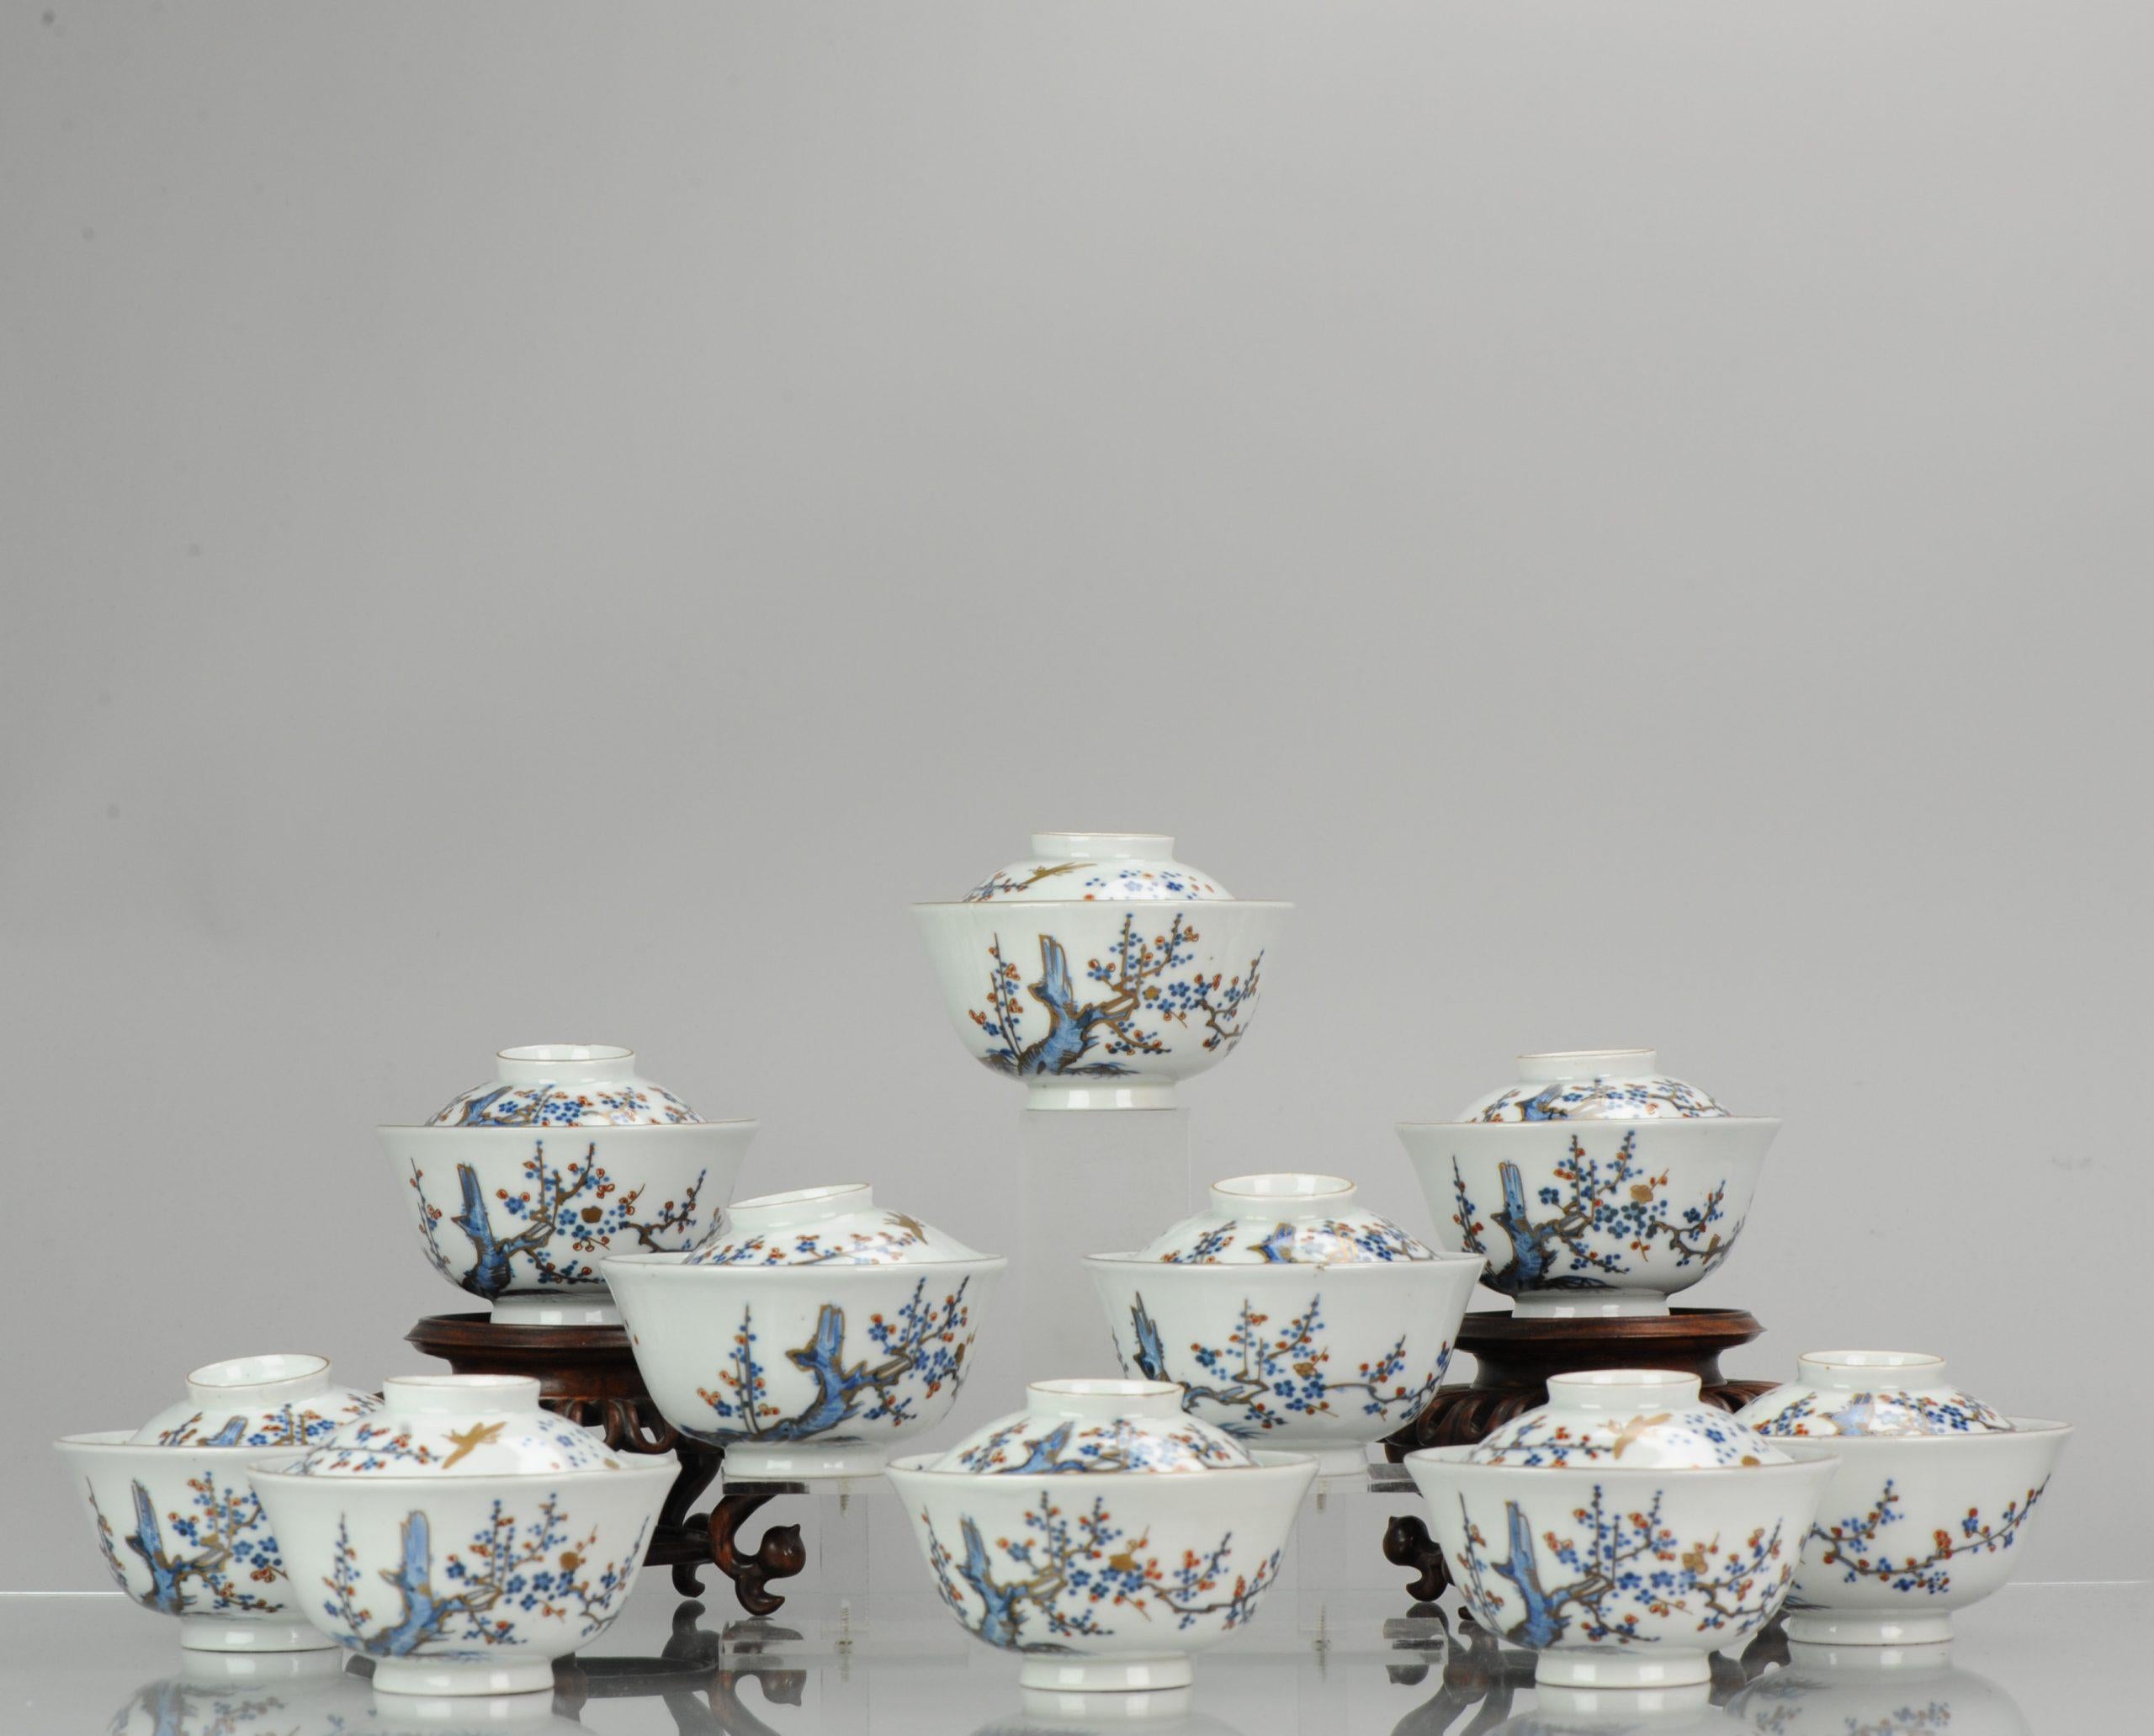  Antique Japanese CHaiwan Meiji/Taisho Period Set Of Tea Bowls Porcelain In Good Condition For Sale In Amsterdam, Noord Holland